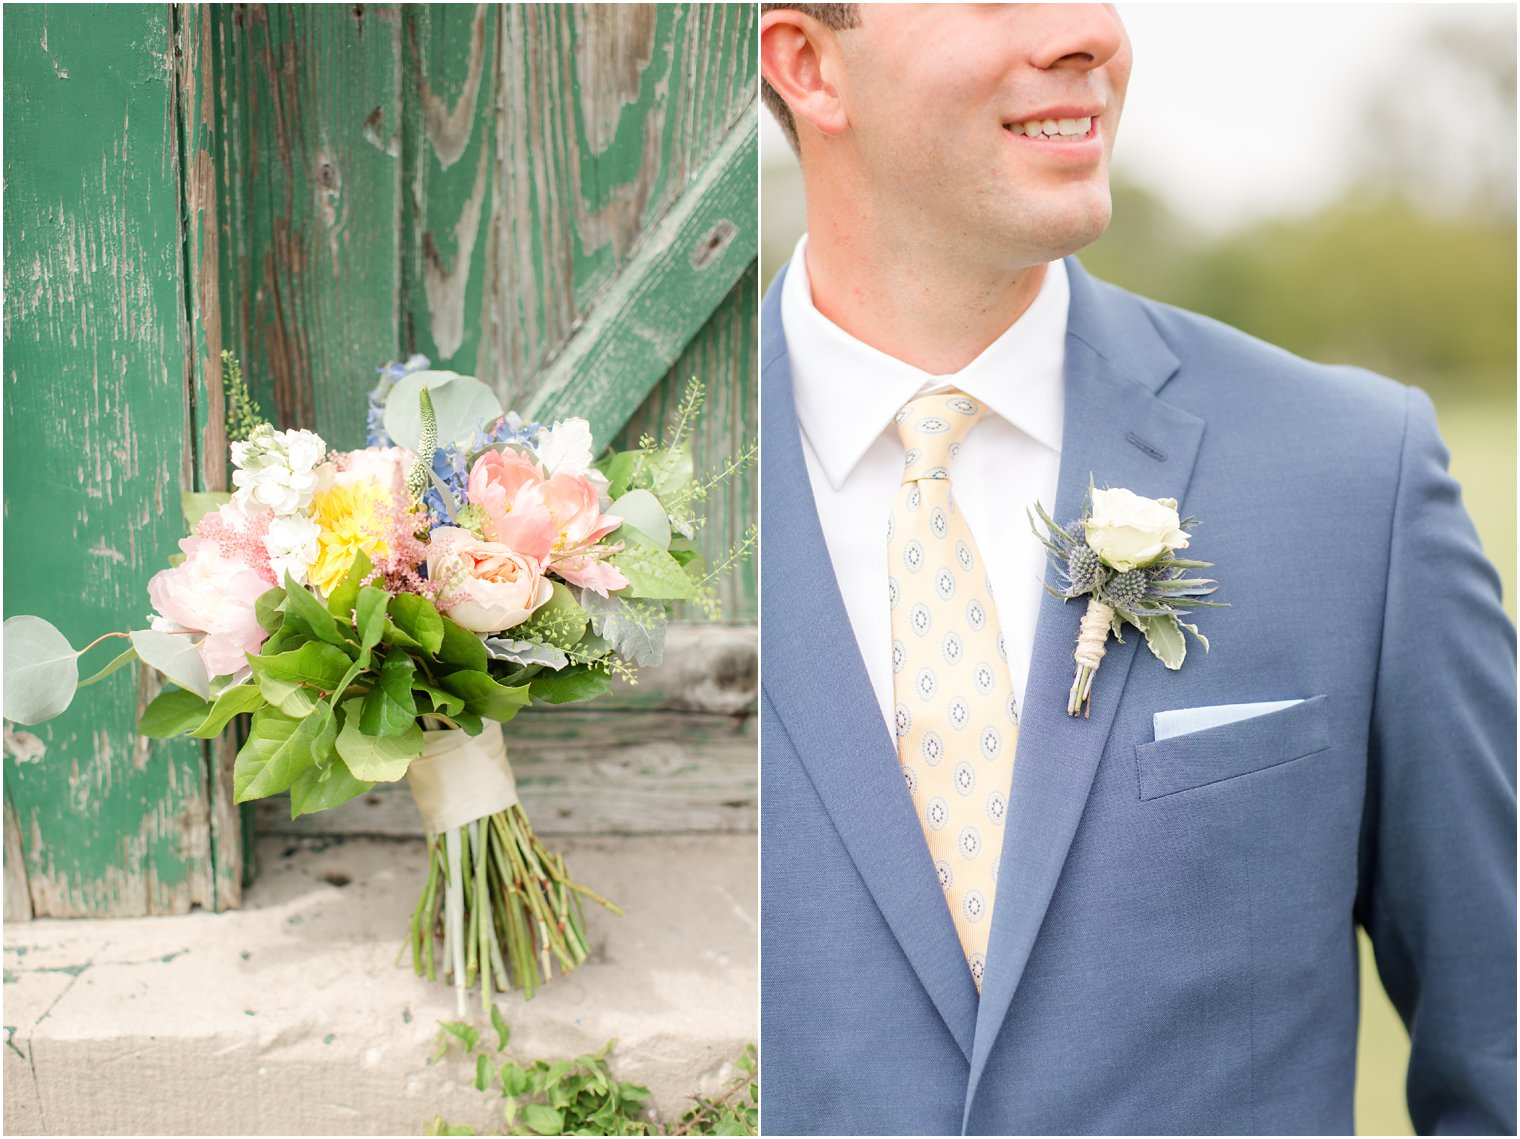 Bouquet and boutonniere by Flowers by Melinda